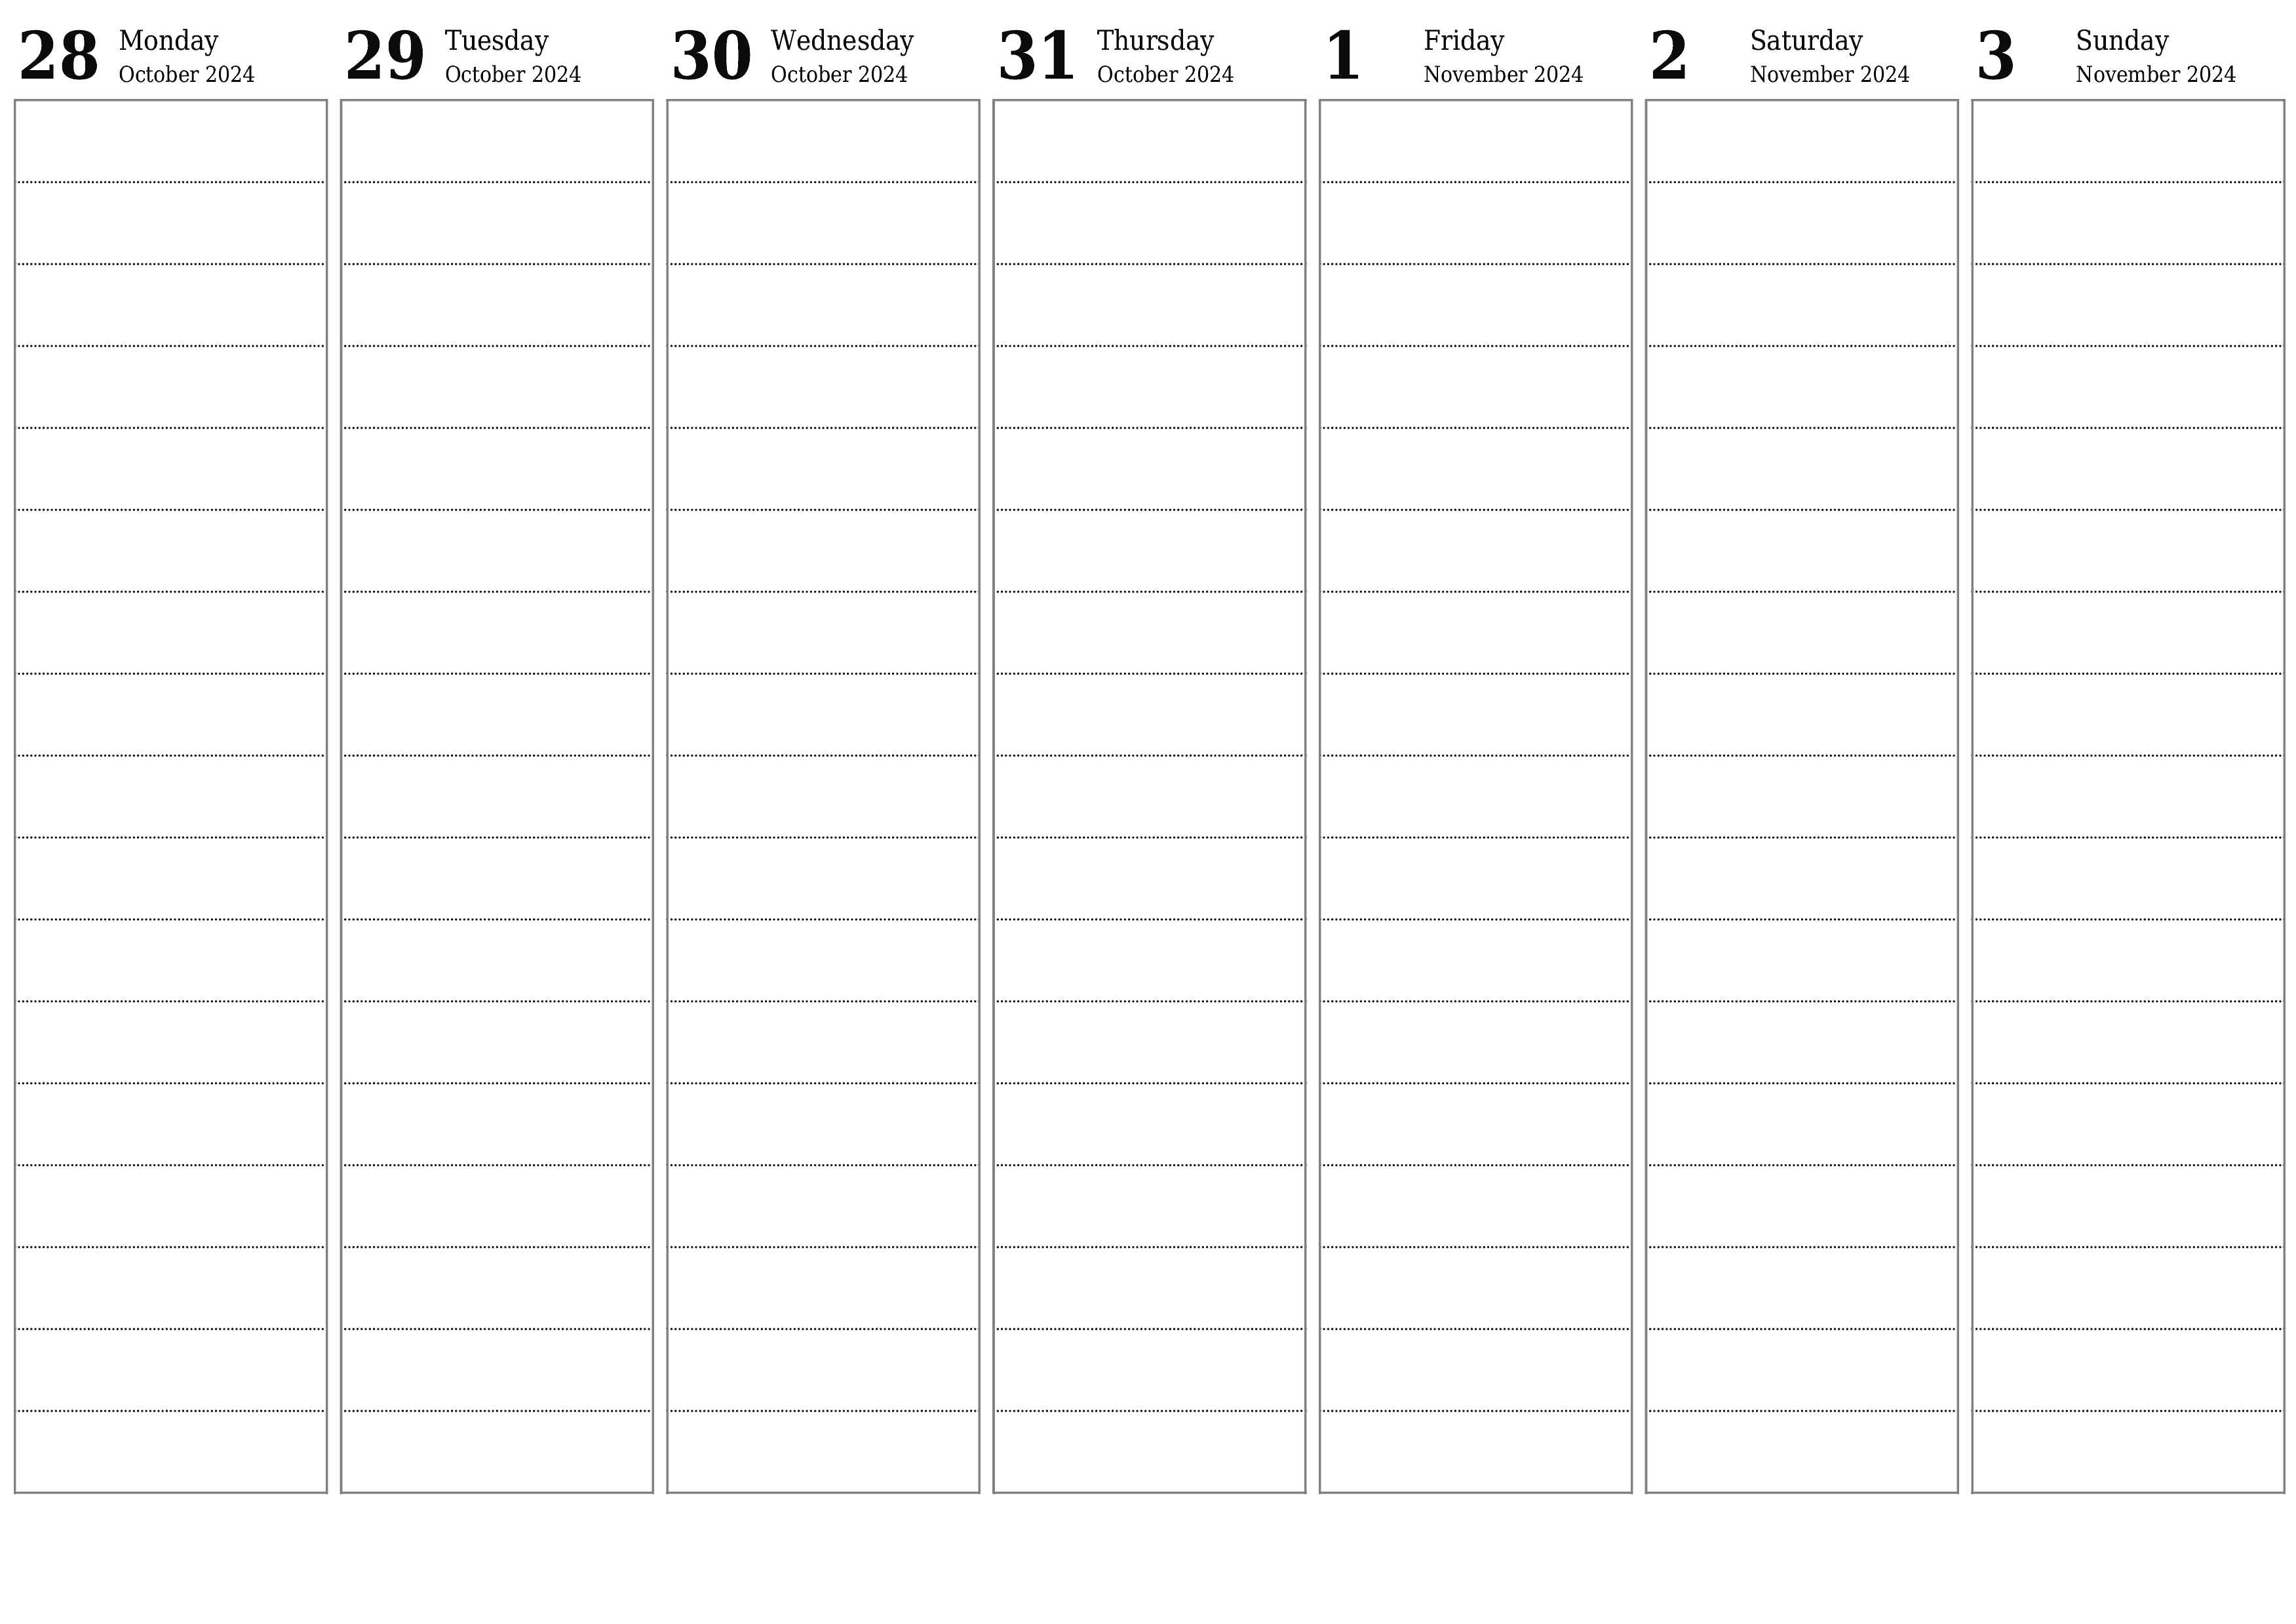 Blank weekly printable calendar and planner for week November 2024 with notes, save and print to PDF PNG English